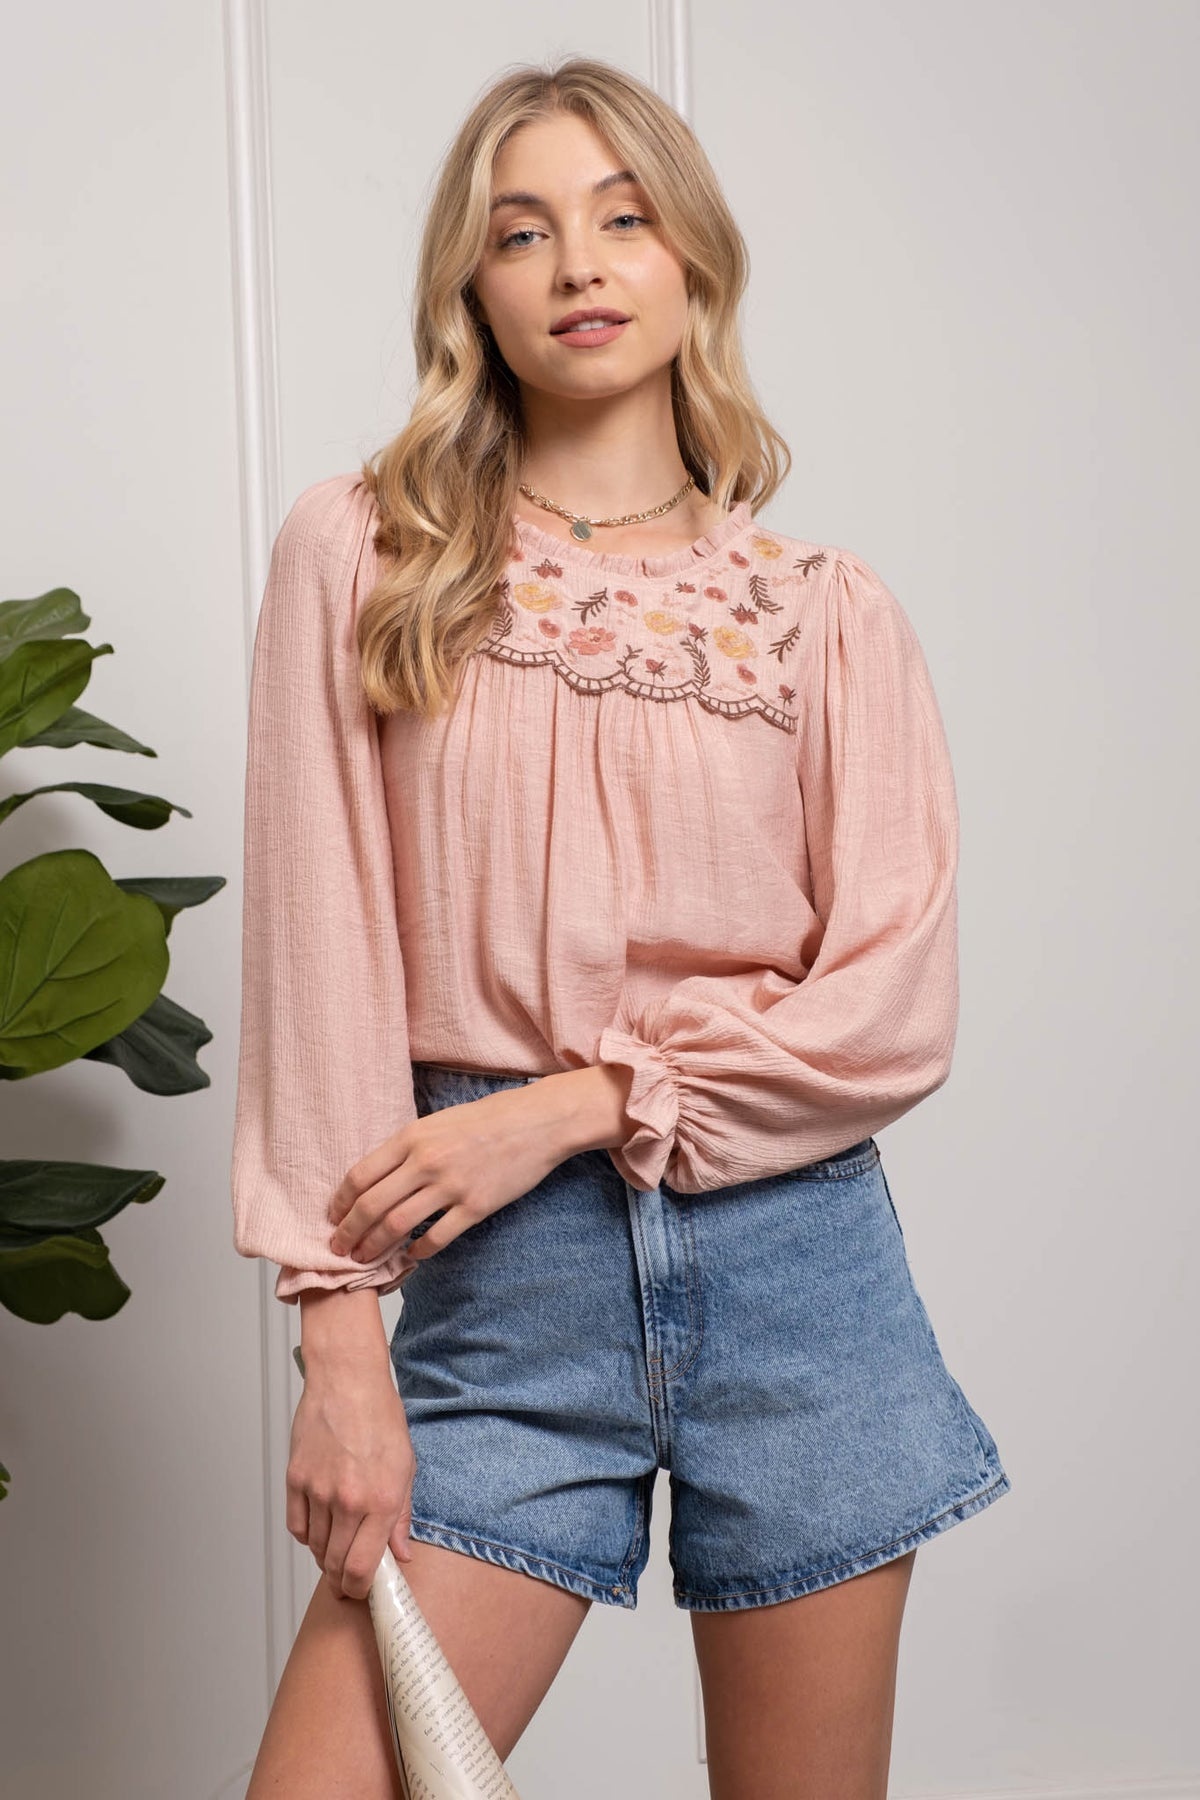 Blu Pepper Embroidered Floral Top